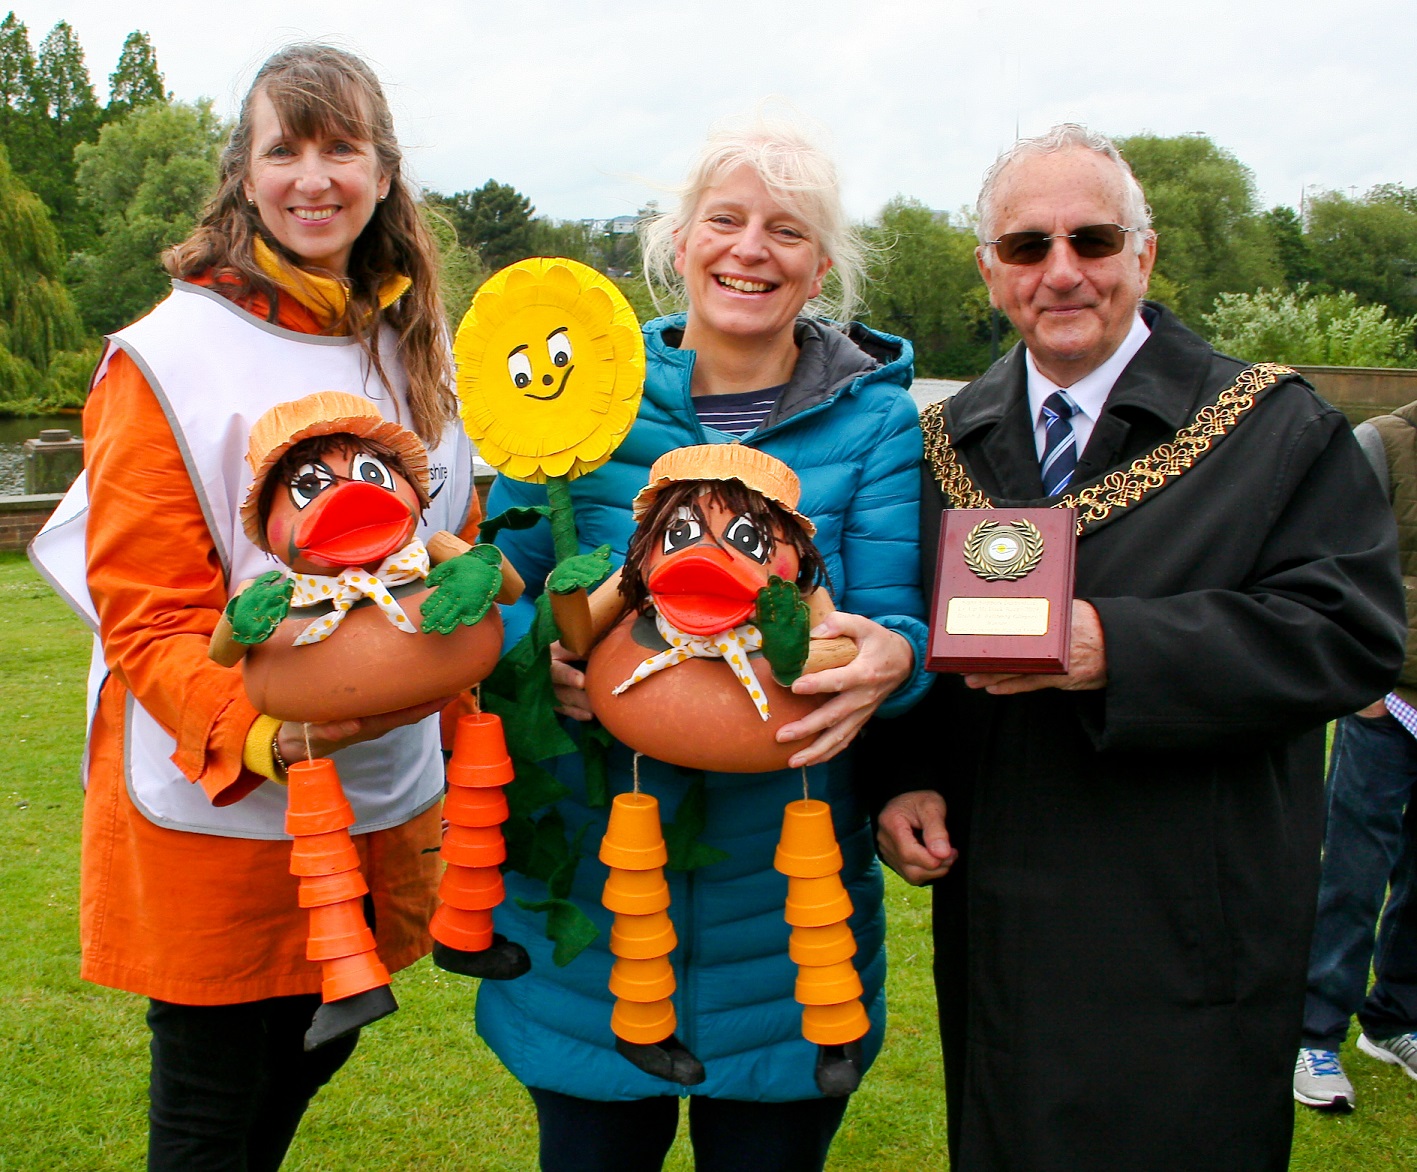 The winner of the health and wellbeing category at the 2019 duck race with their Bill and Ben ducks